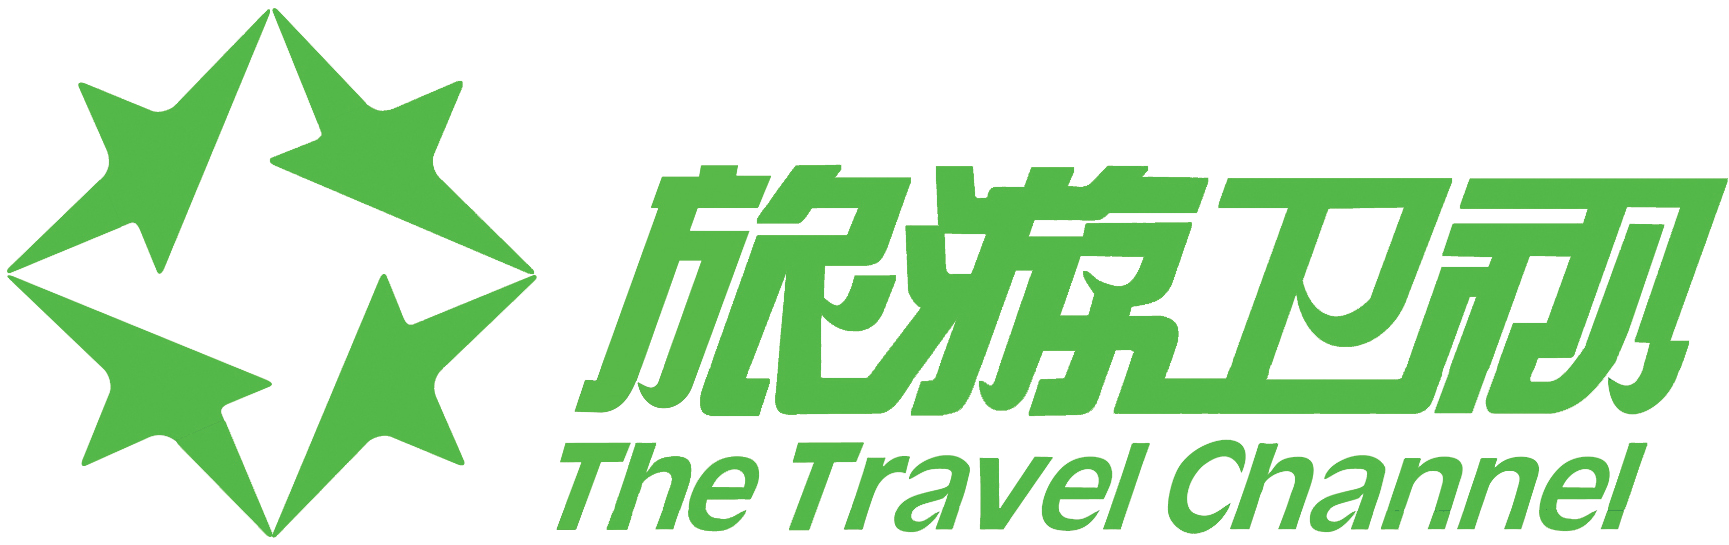 Download The Travel Channel Logo Logotype - 旅游 卫视 PNG Image with No ...